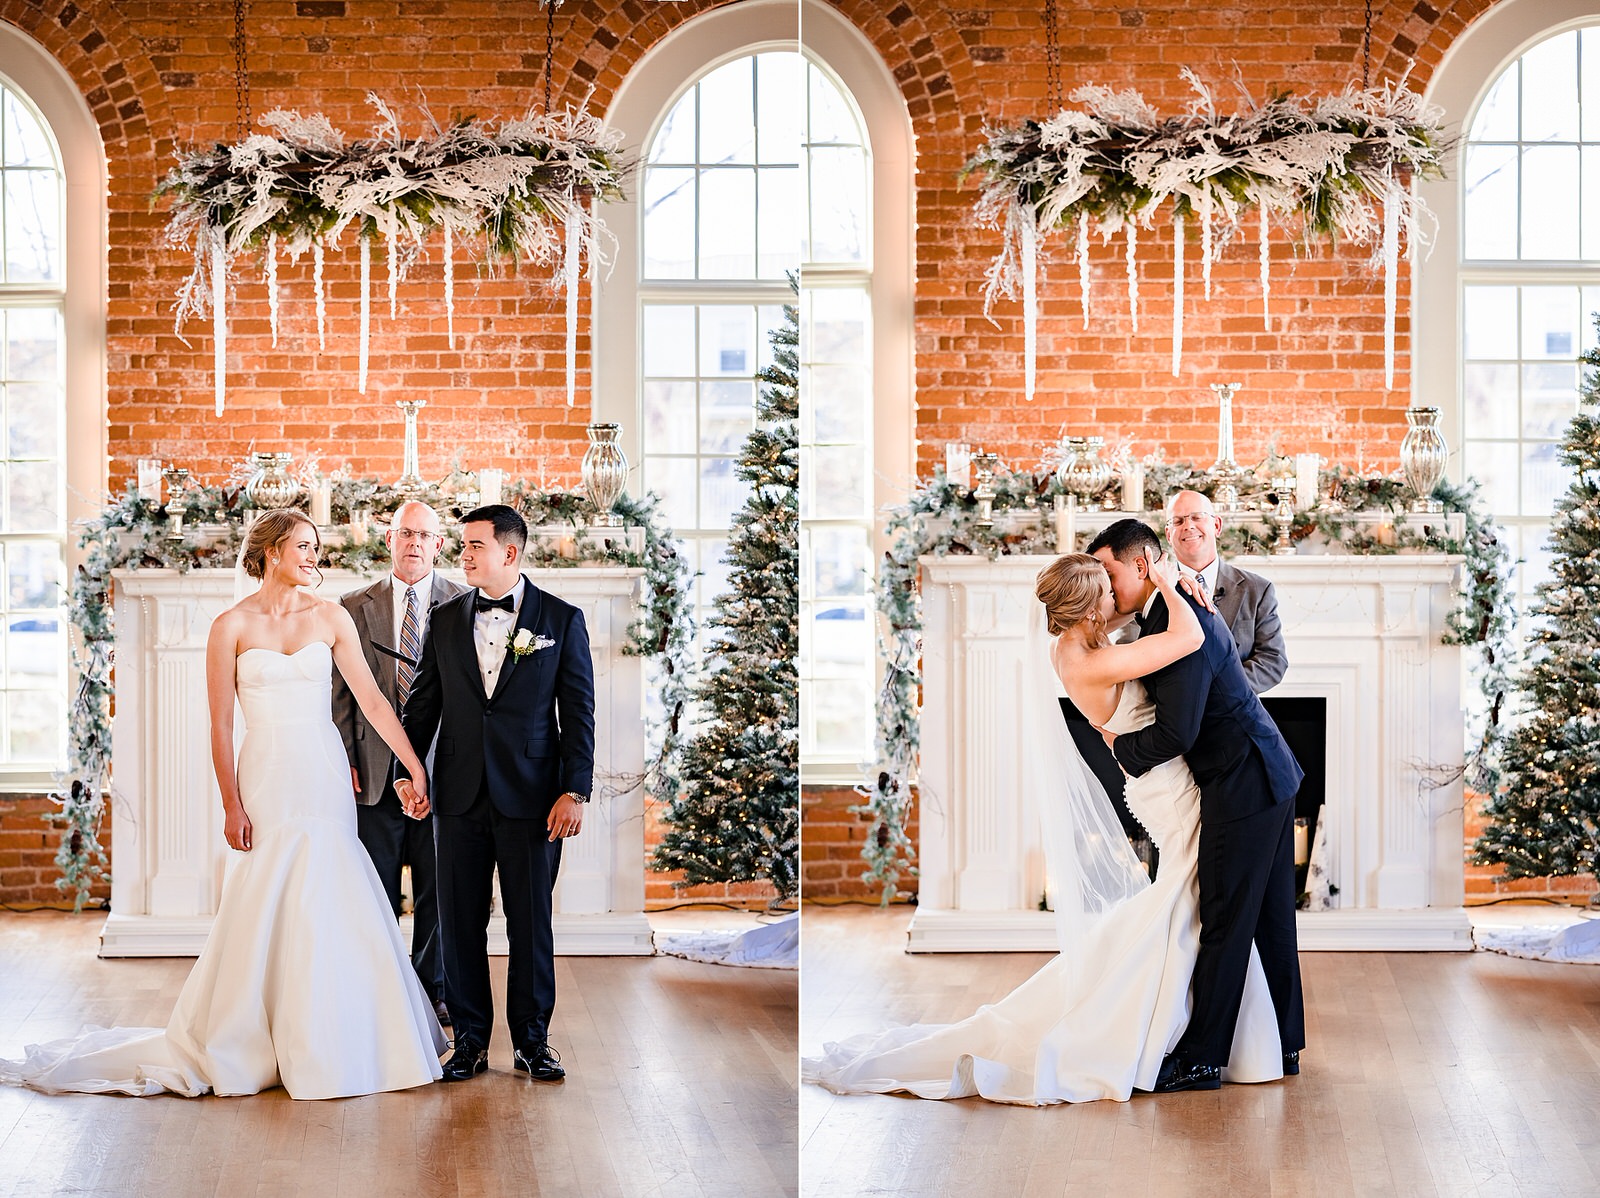 The Cotton Room in Durham, NC set up for a Christmas Wedding ceremony